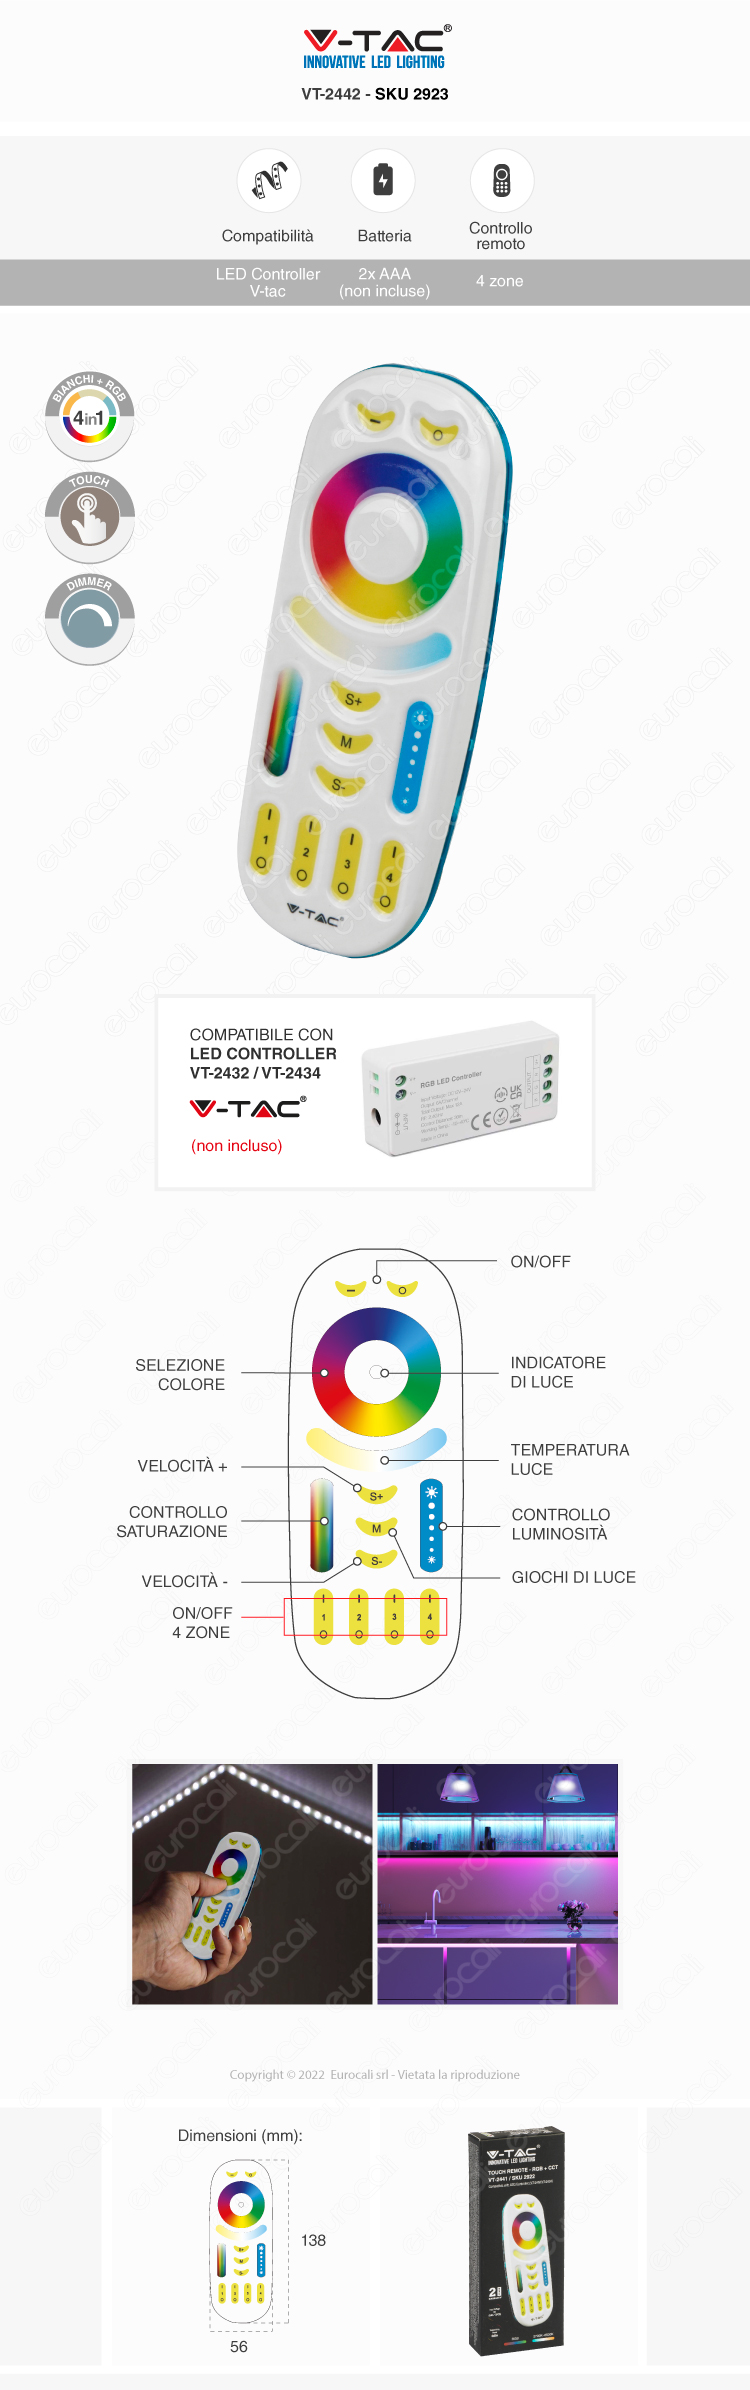 v-tac vt-2441 4-zone touch remote control wireless per controller strisce led rgb+w cct